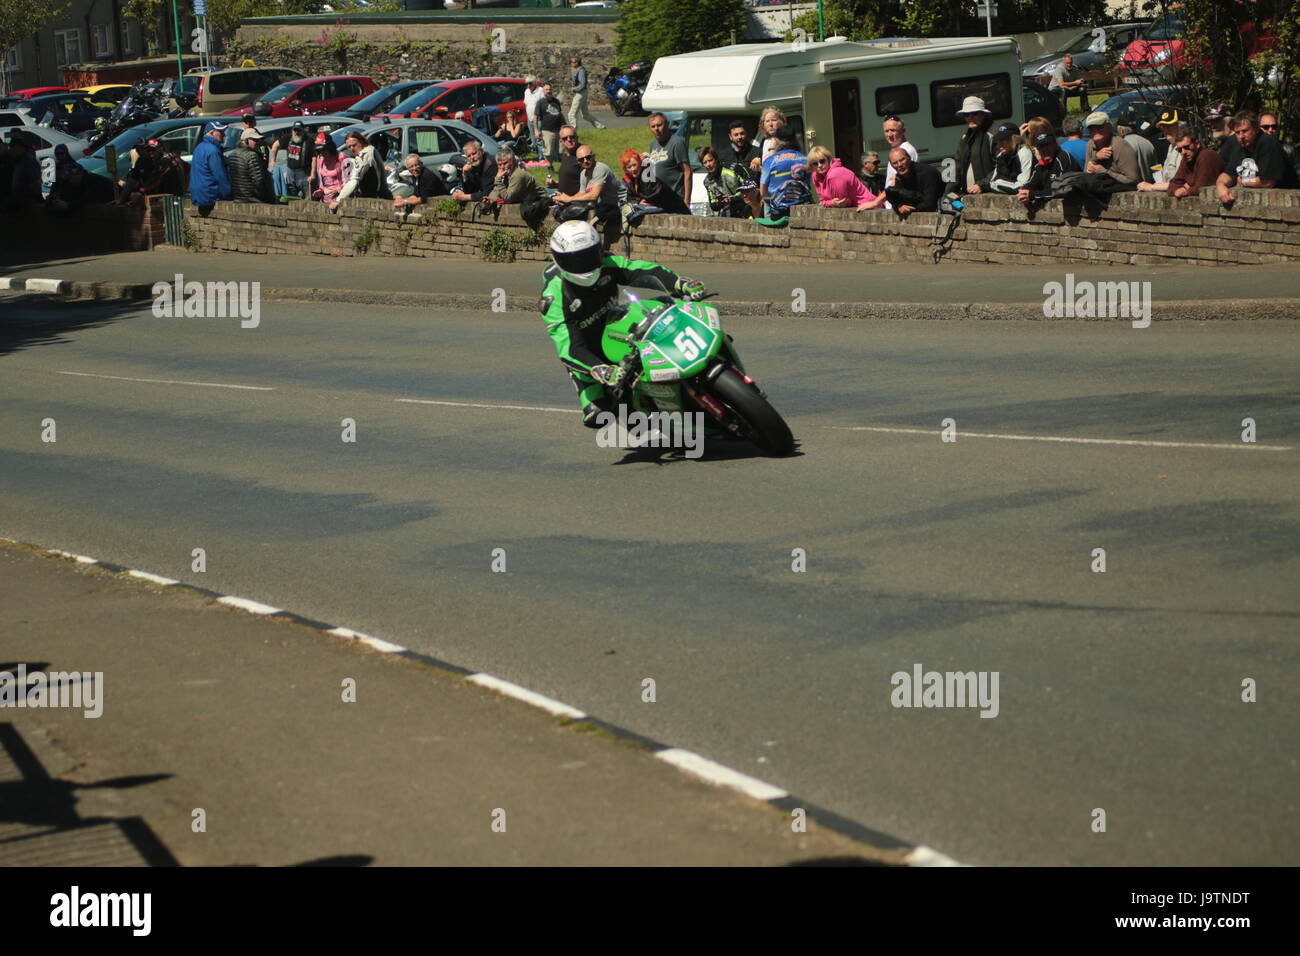 Isle of Man TT Races, Sidecar, Supersport/Lightweight/Newcomers (all classes) Qualifying Session and Practice Race. Saturday, 3 June 2017. 51 Ian Gardner on his lightweight Kawasaki of the Utilergy-Curtis Site Services Team. Credit: Eclectic Art and Photography/Alamy Live News. Stock Photo